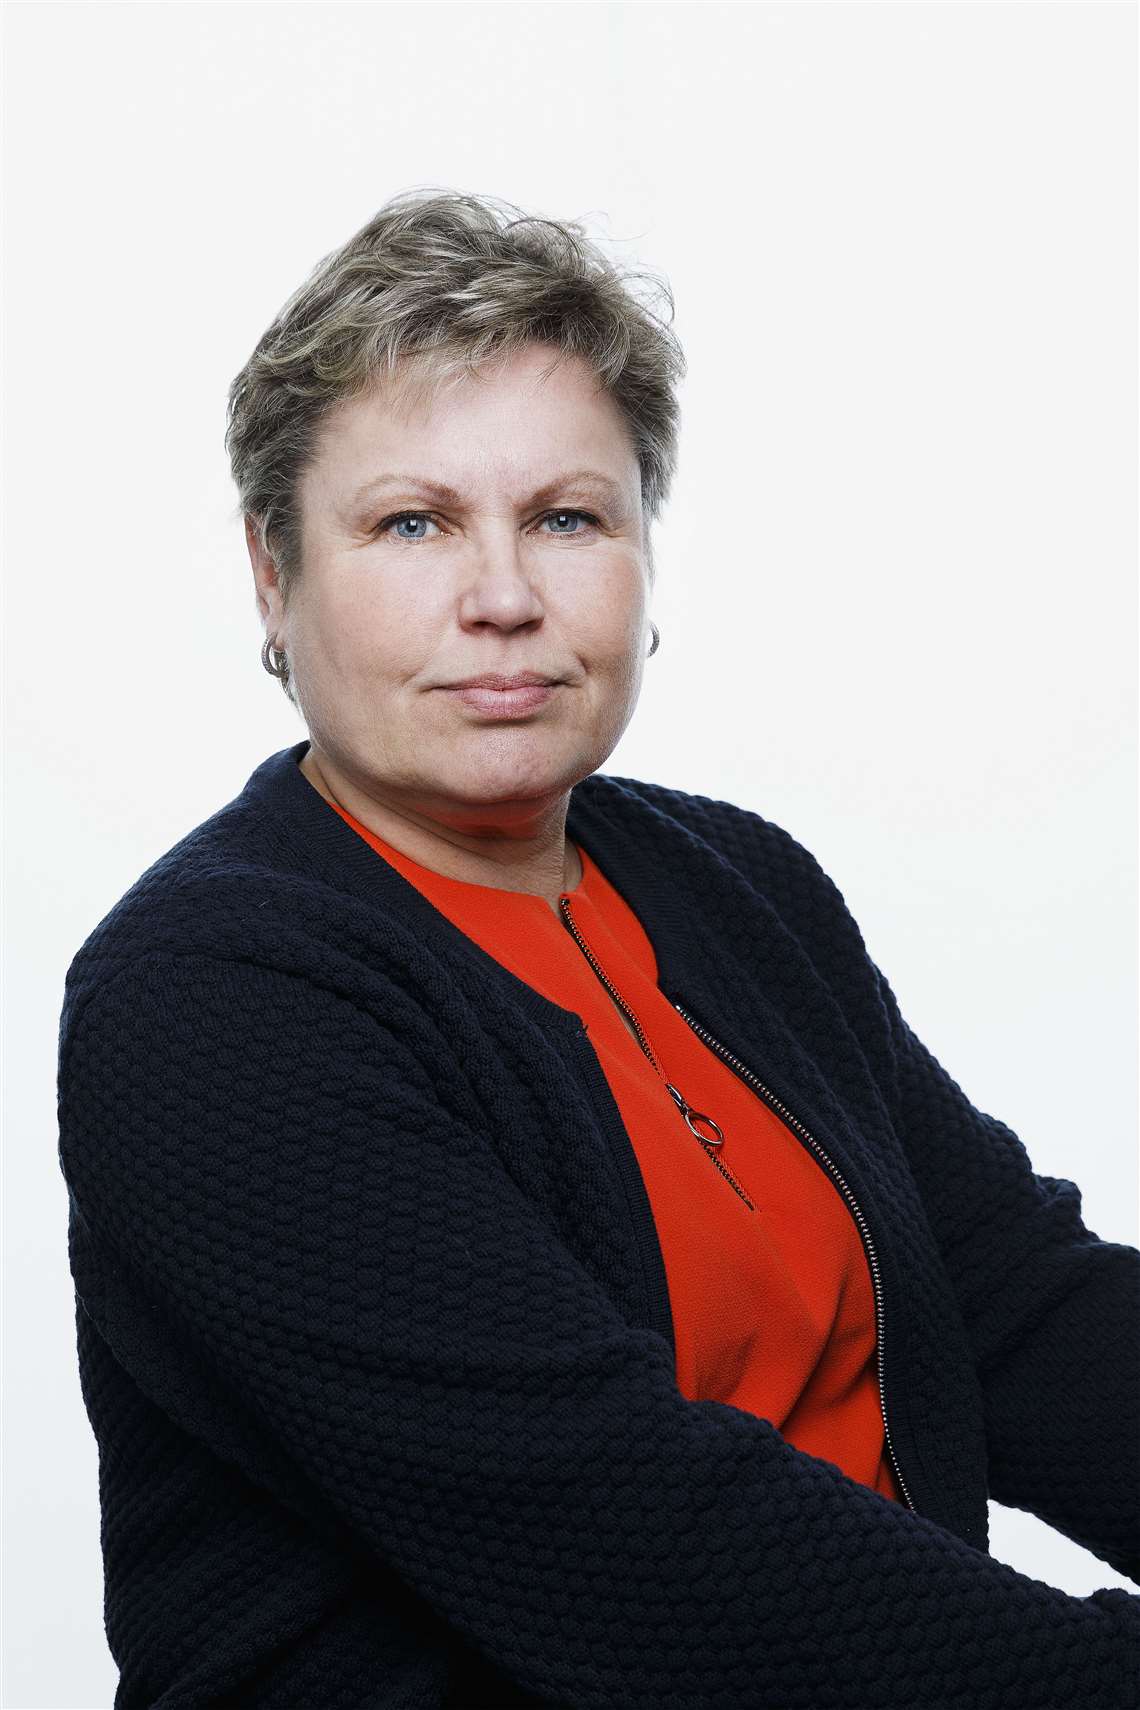 Anna-Lena Berg, Riwal's country manager for Sweden